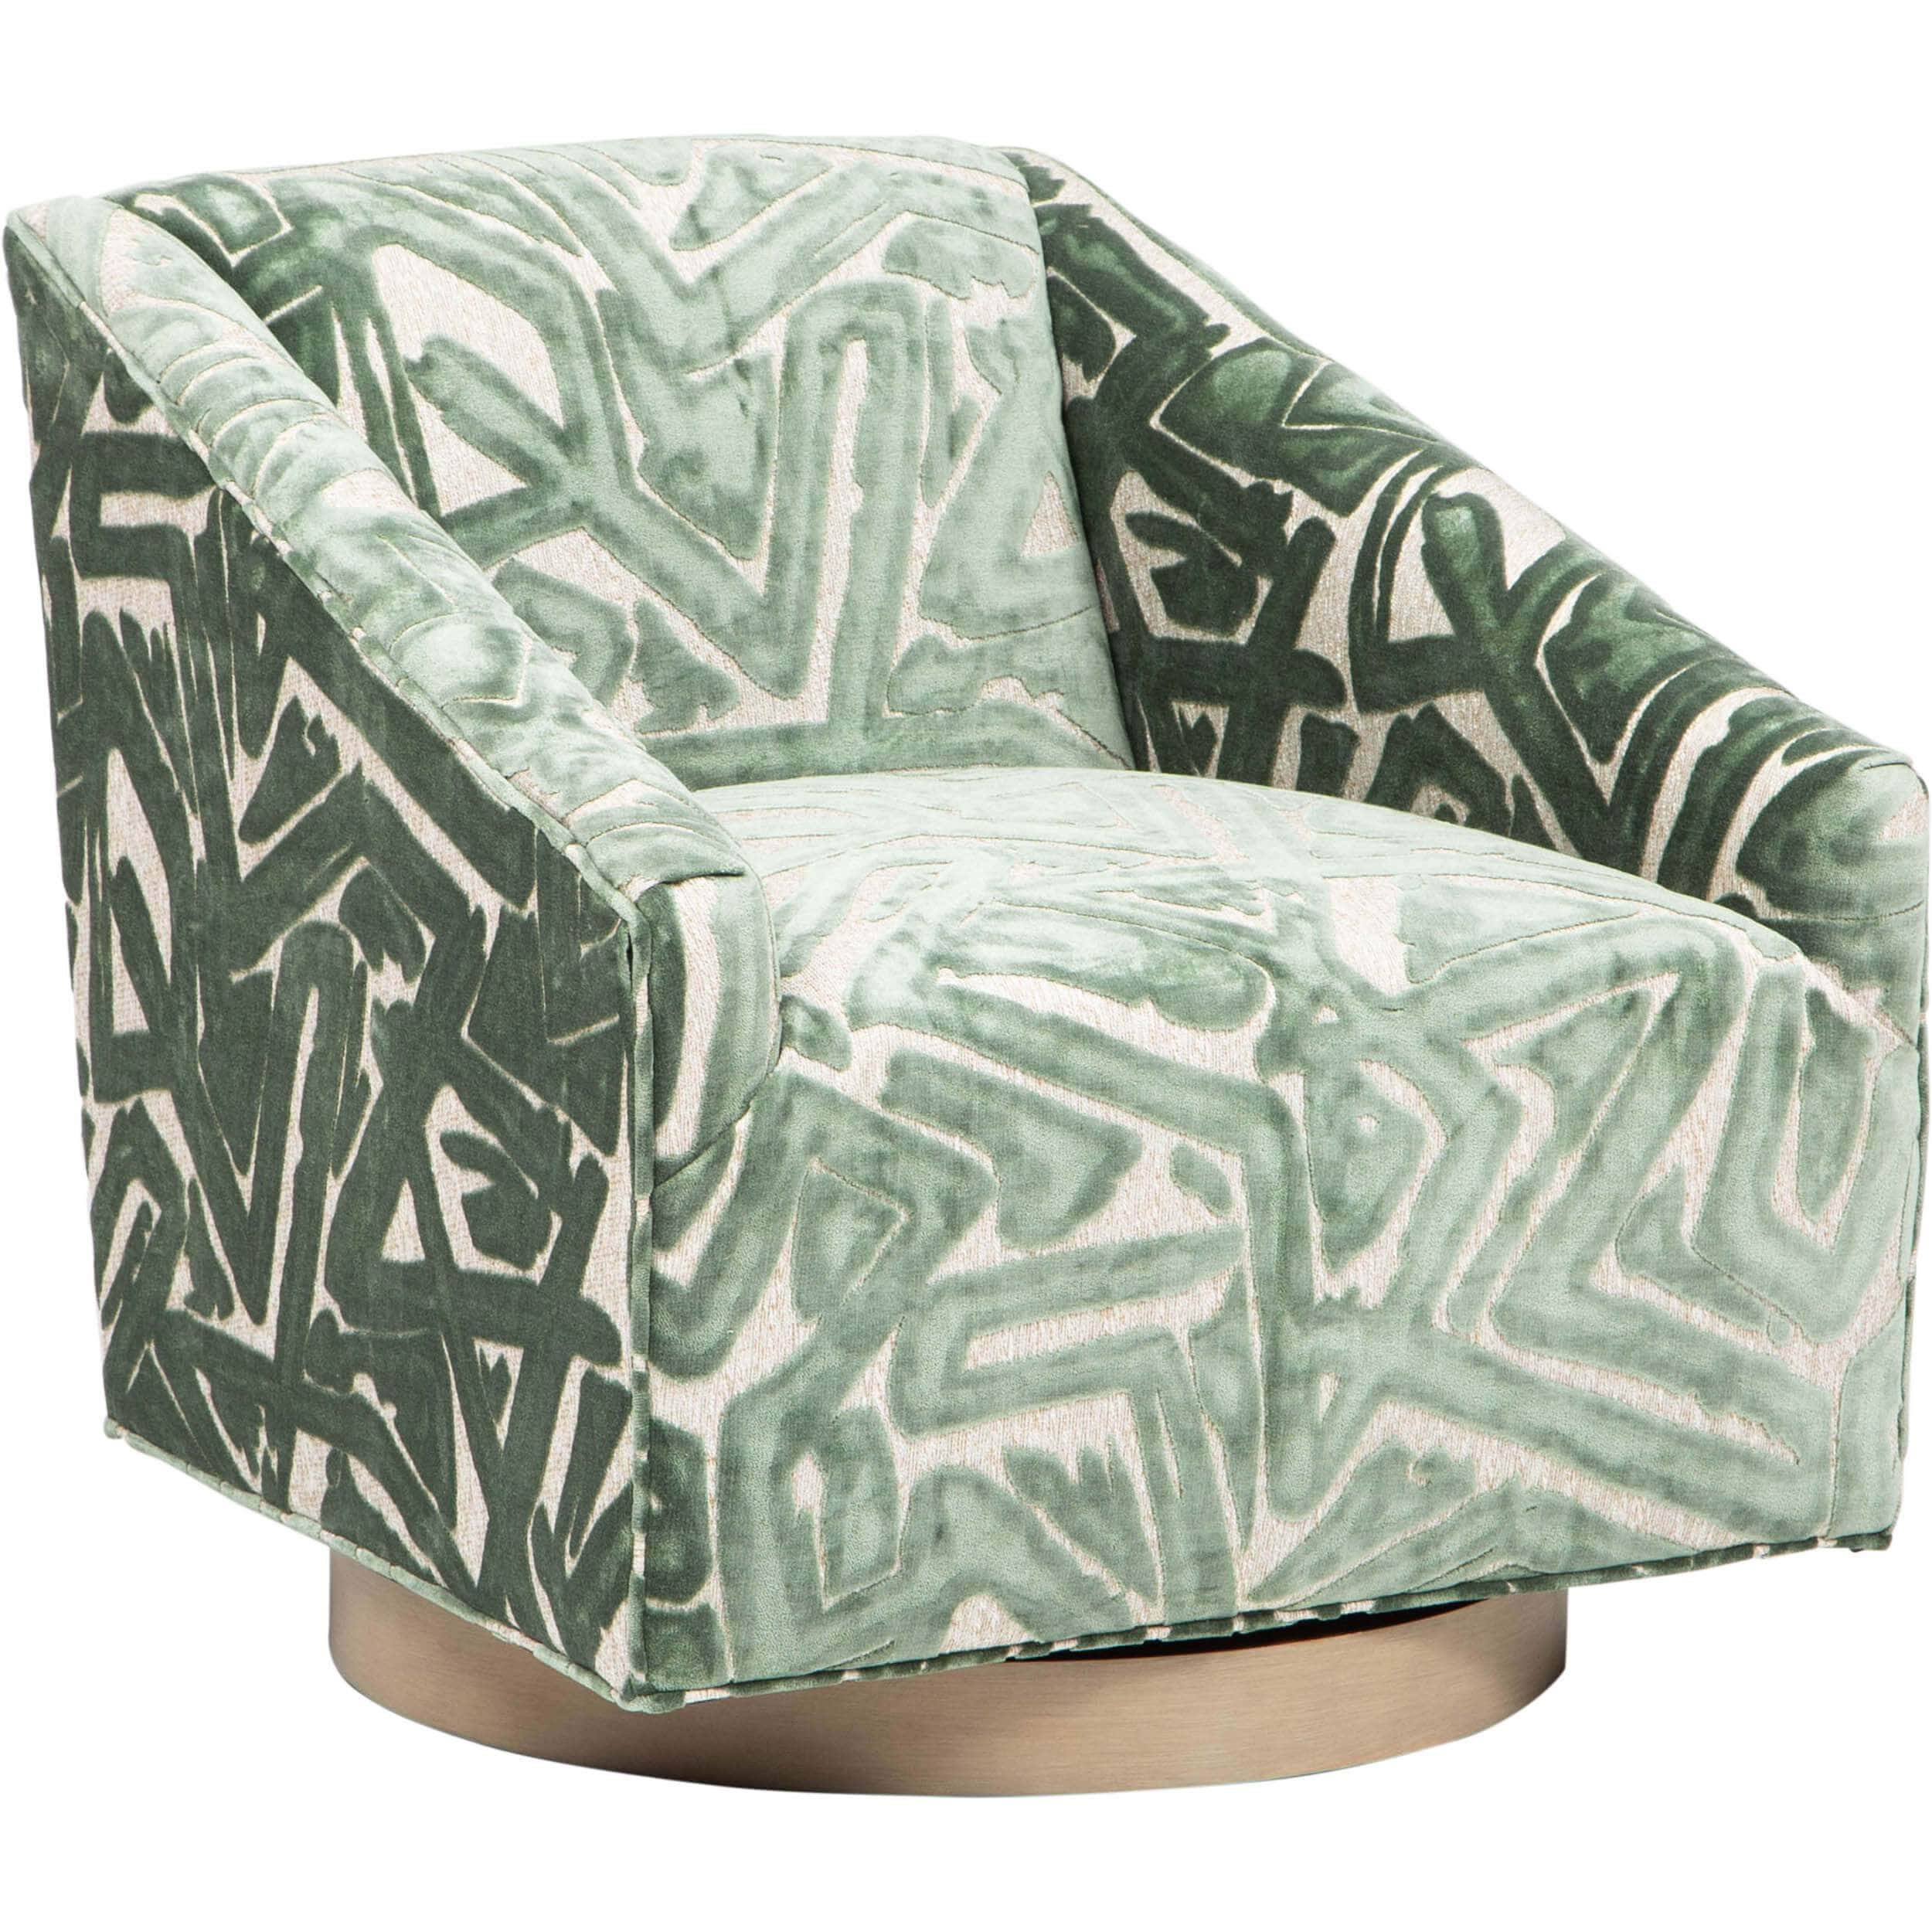 Image of Ellie Swivel Chair, ACDC Pine